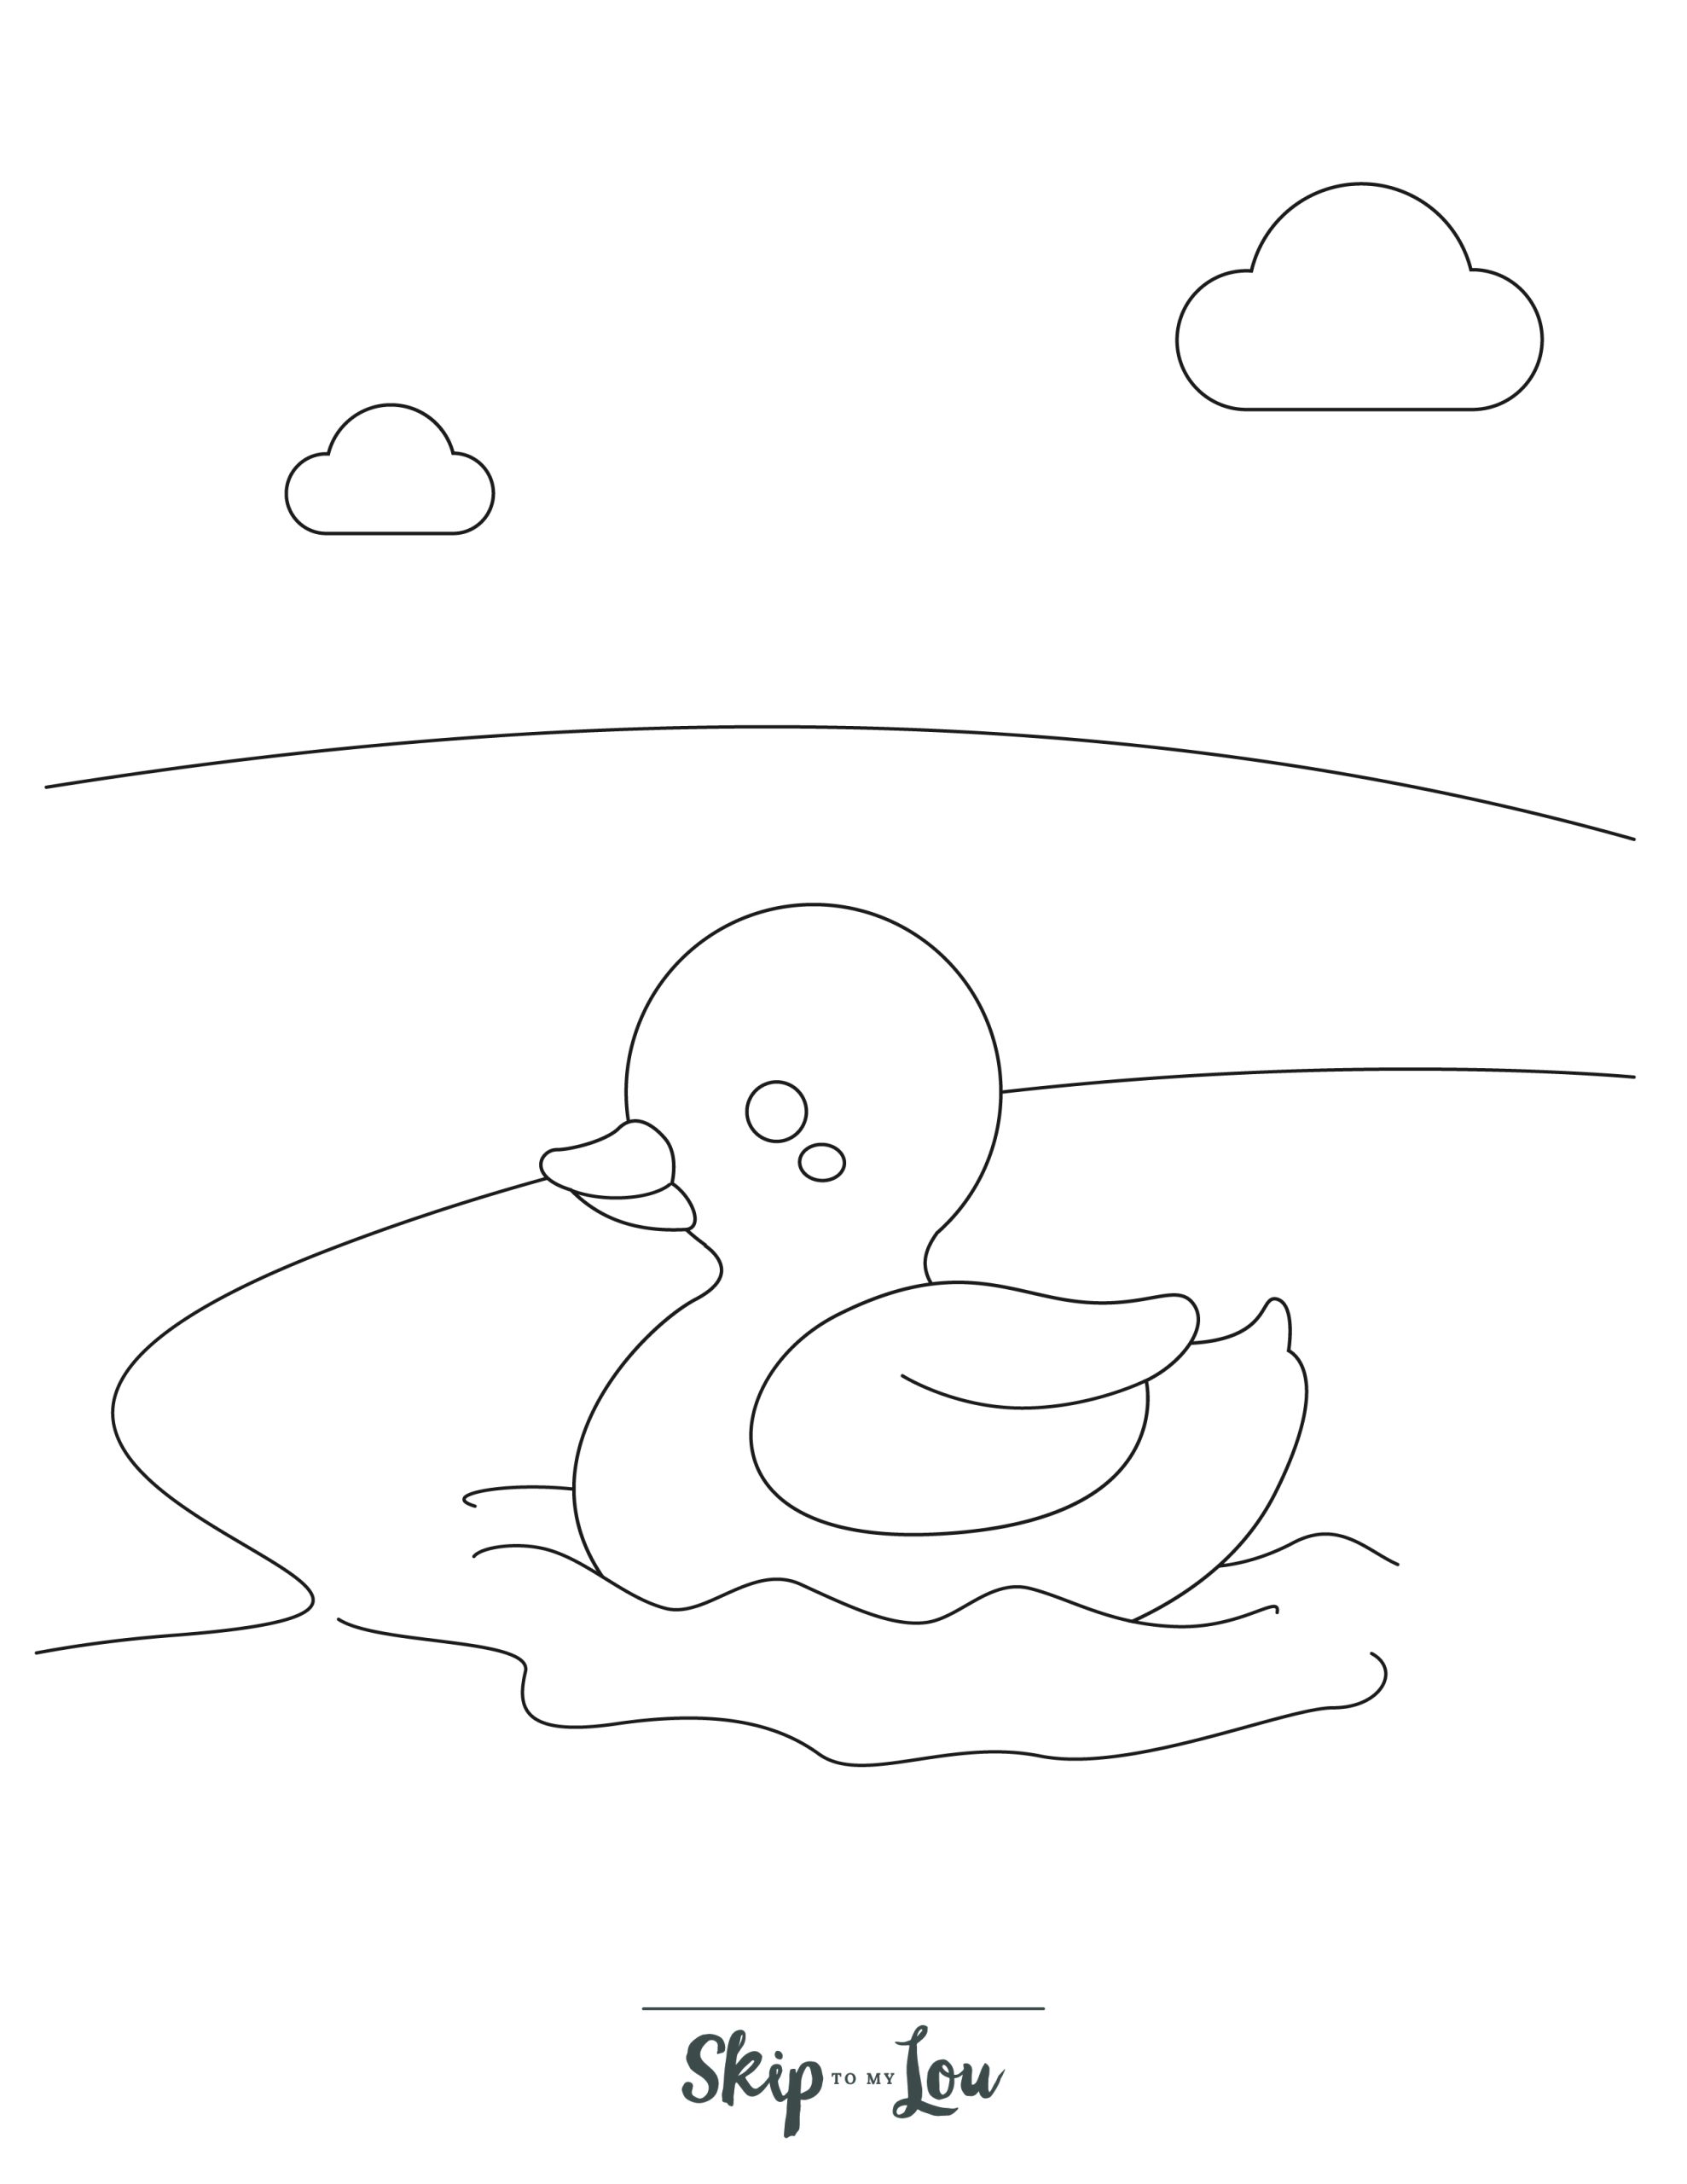 Preschool Coloring Page 4 - Simple line drawing of a duck in a pond